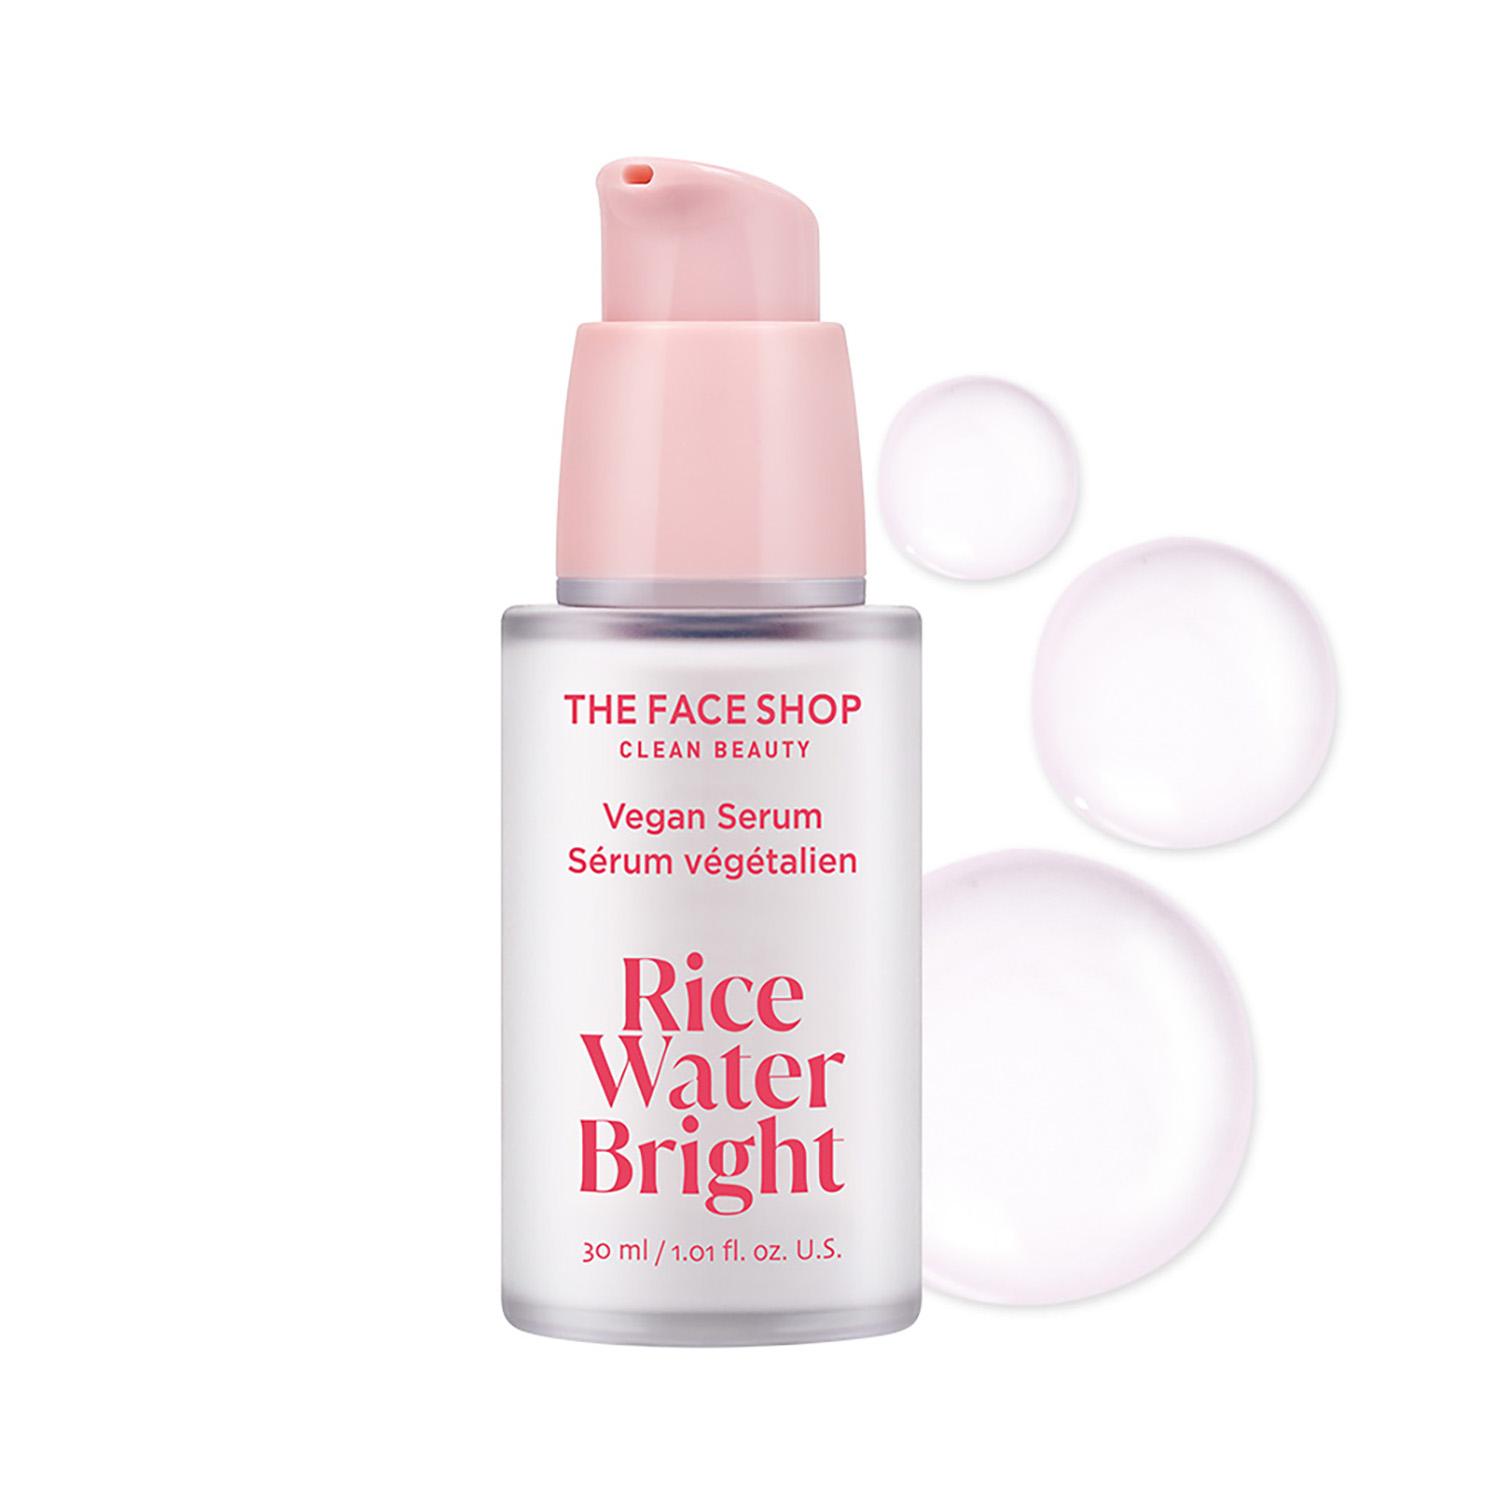 The Face Shop | The Face Shop Rice Water Bright Vegan Serum (30 ml)